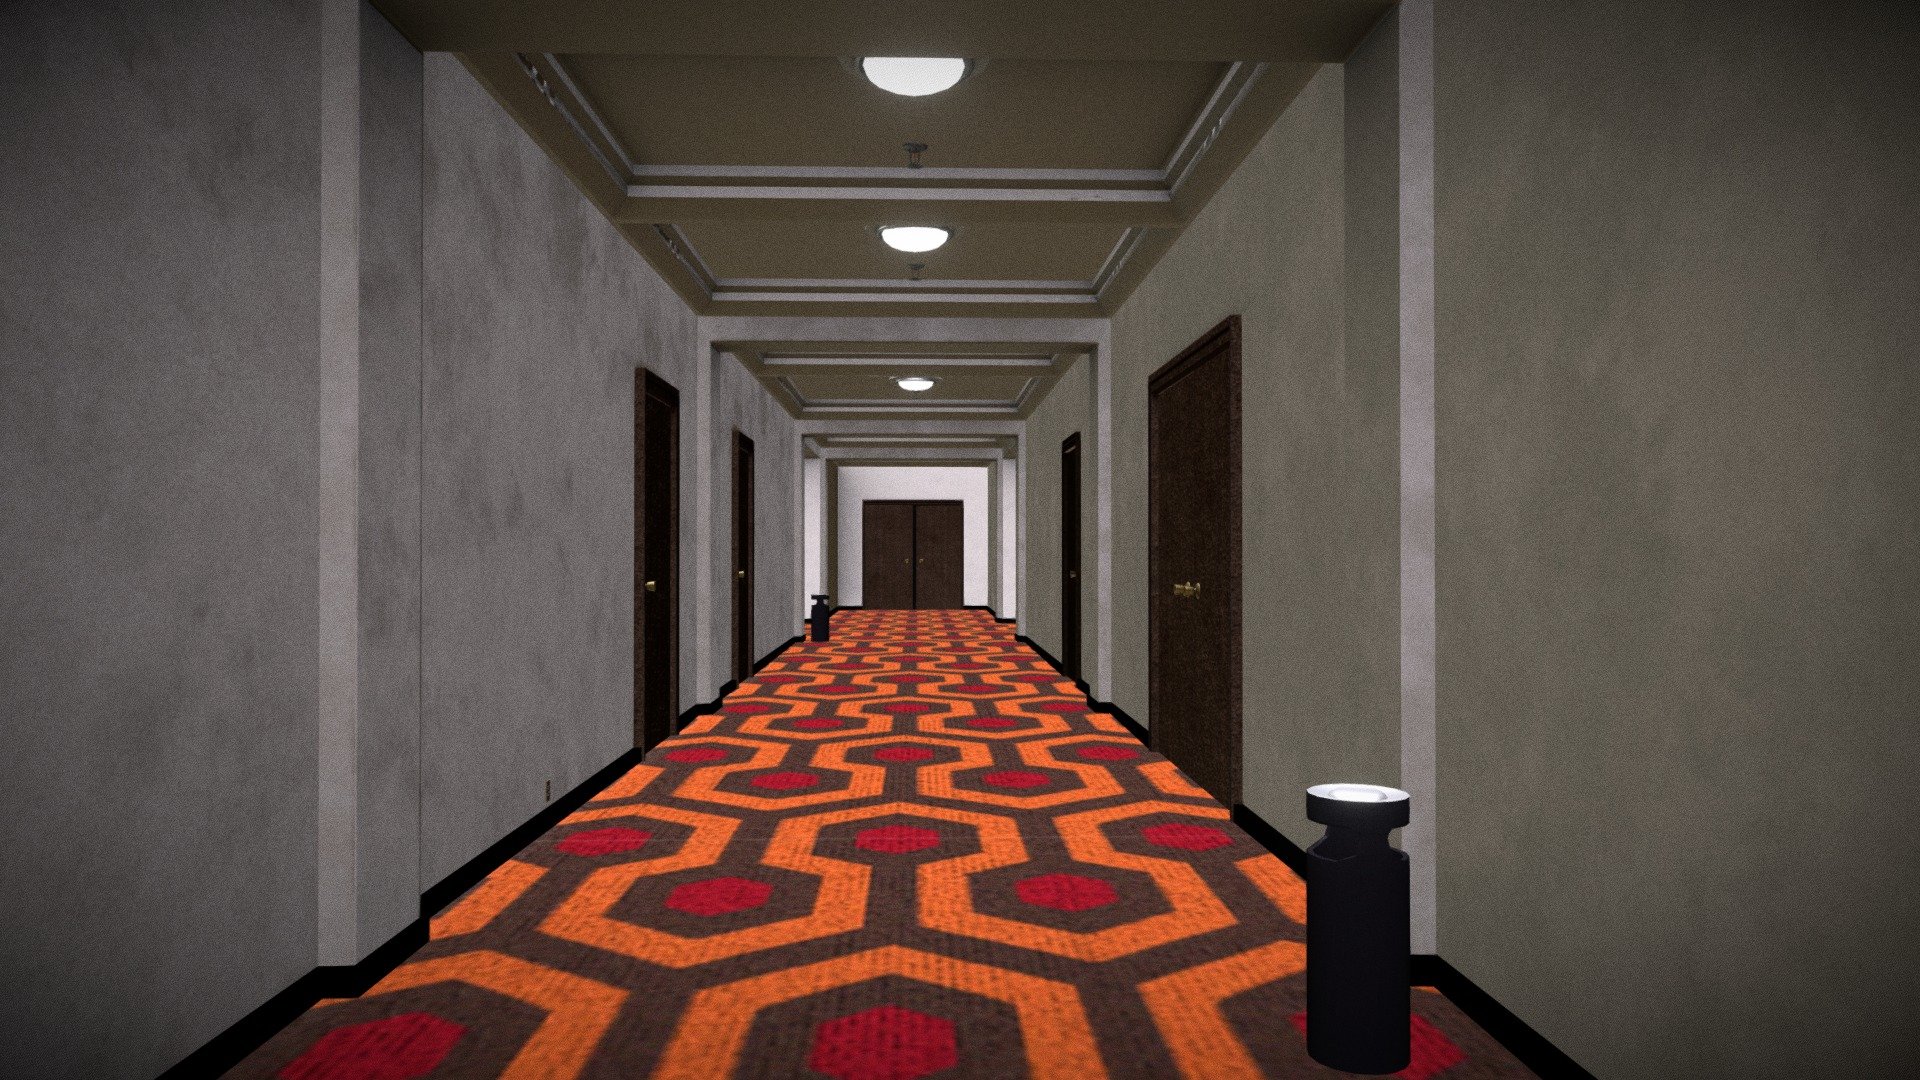 The famous Overlook Hotel Corridor from the Movie The Shinning (1980)  I made it for a 3D Modelling Challenge it is ready for a game engine even I use it for unreal it has 10364 verts 7569 polys and 14890 tris in total and the textures are 2048 x 2048 and each Asset includes Diffuse, Metallic, Normal and Roughness and the map includes Emissive an d the floor doesn't have Metallic or Roughness and the file formats are MB, FBX and OBJ if you need game assets or STL files I can do commission works 3d model